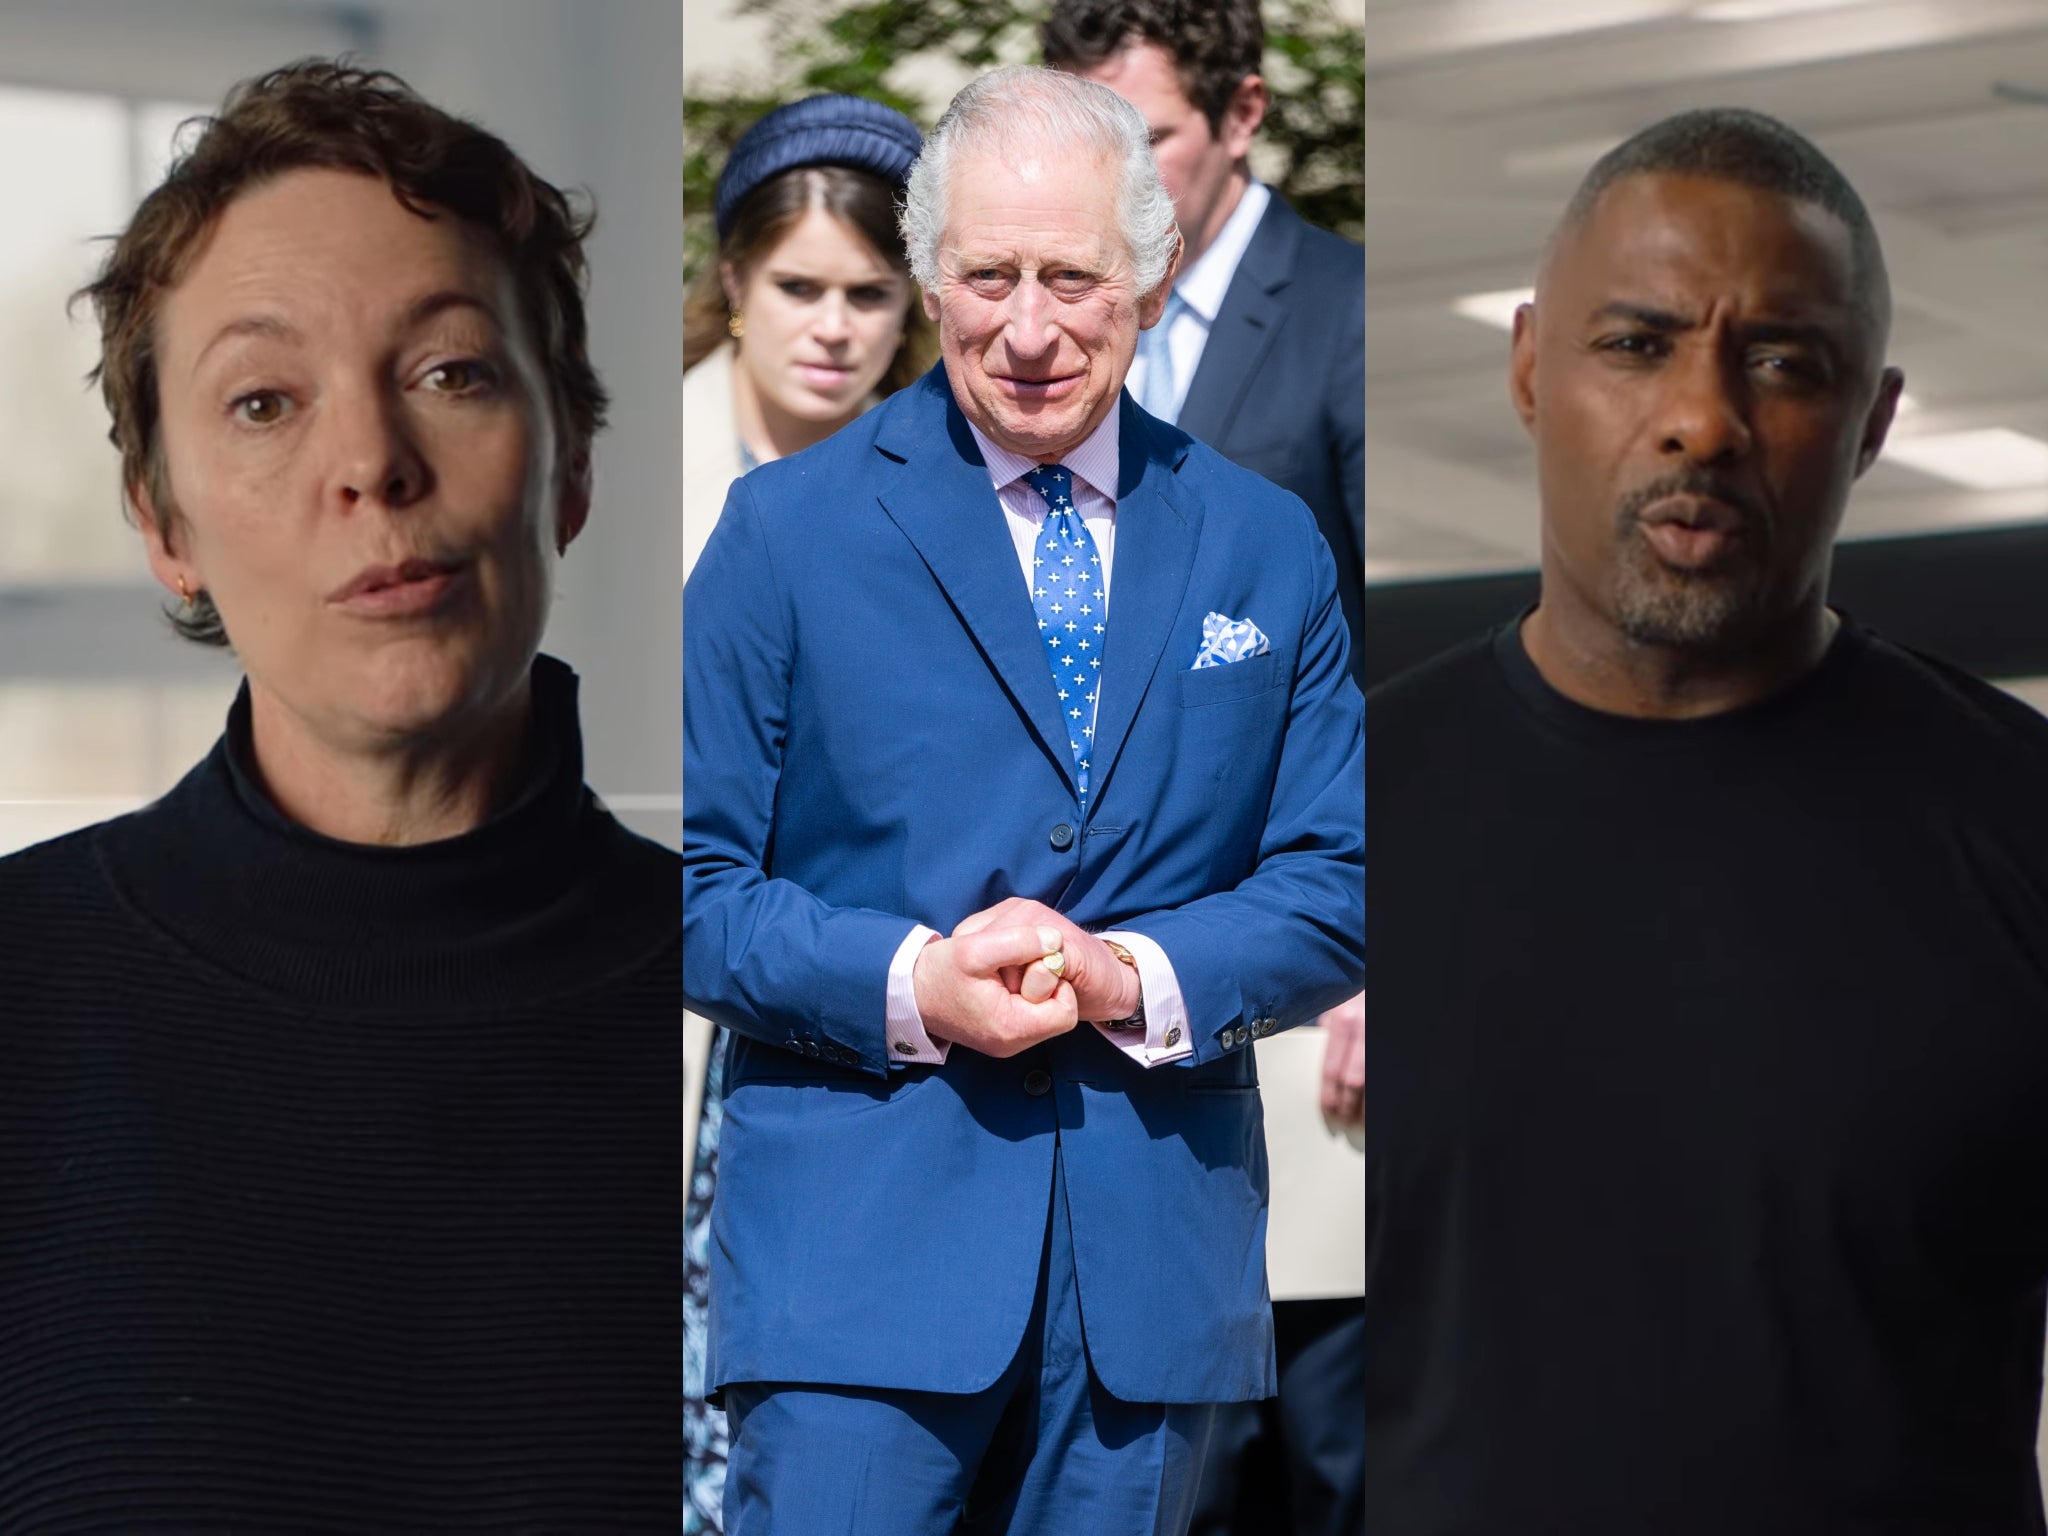 Olivia Colman and Idris Elba are among celebrities and activists who quote King Charles III’s speeches about environmentalism in new YouTube channel